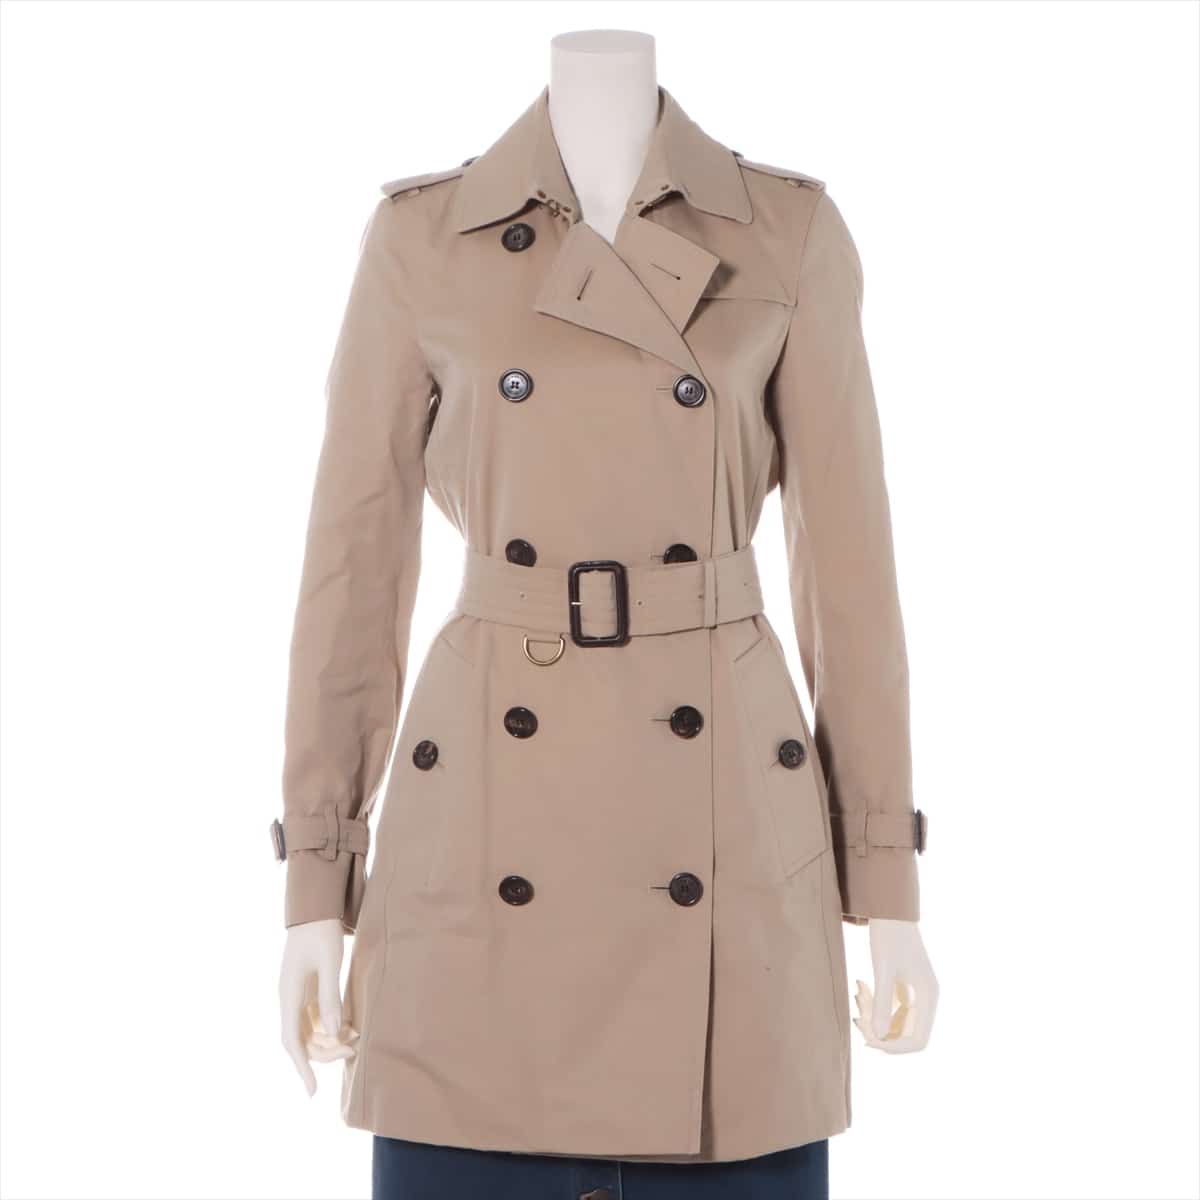 Burberry Kensington Cotton Trench coat UK 4 Ladies' Beige  There are spots on the armpits